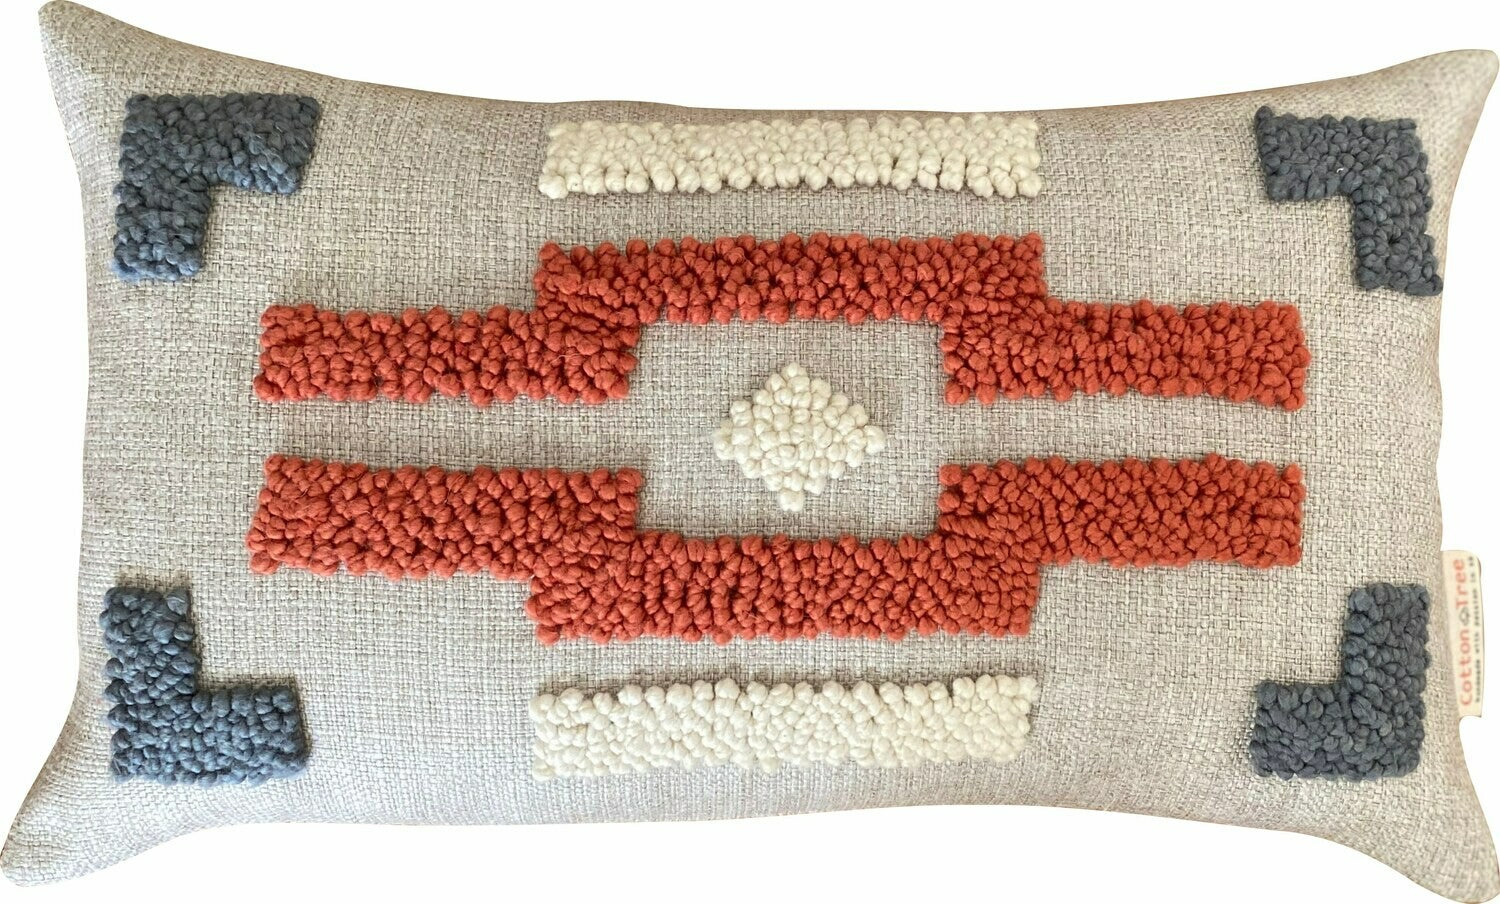 Scatter_Cushion_Punchneedle_African_Ndebele_Natural_Charcoal_Rust